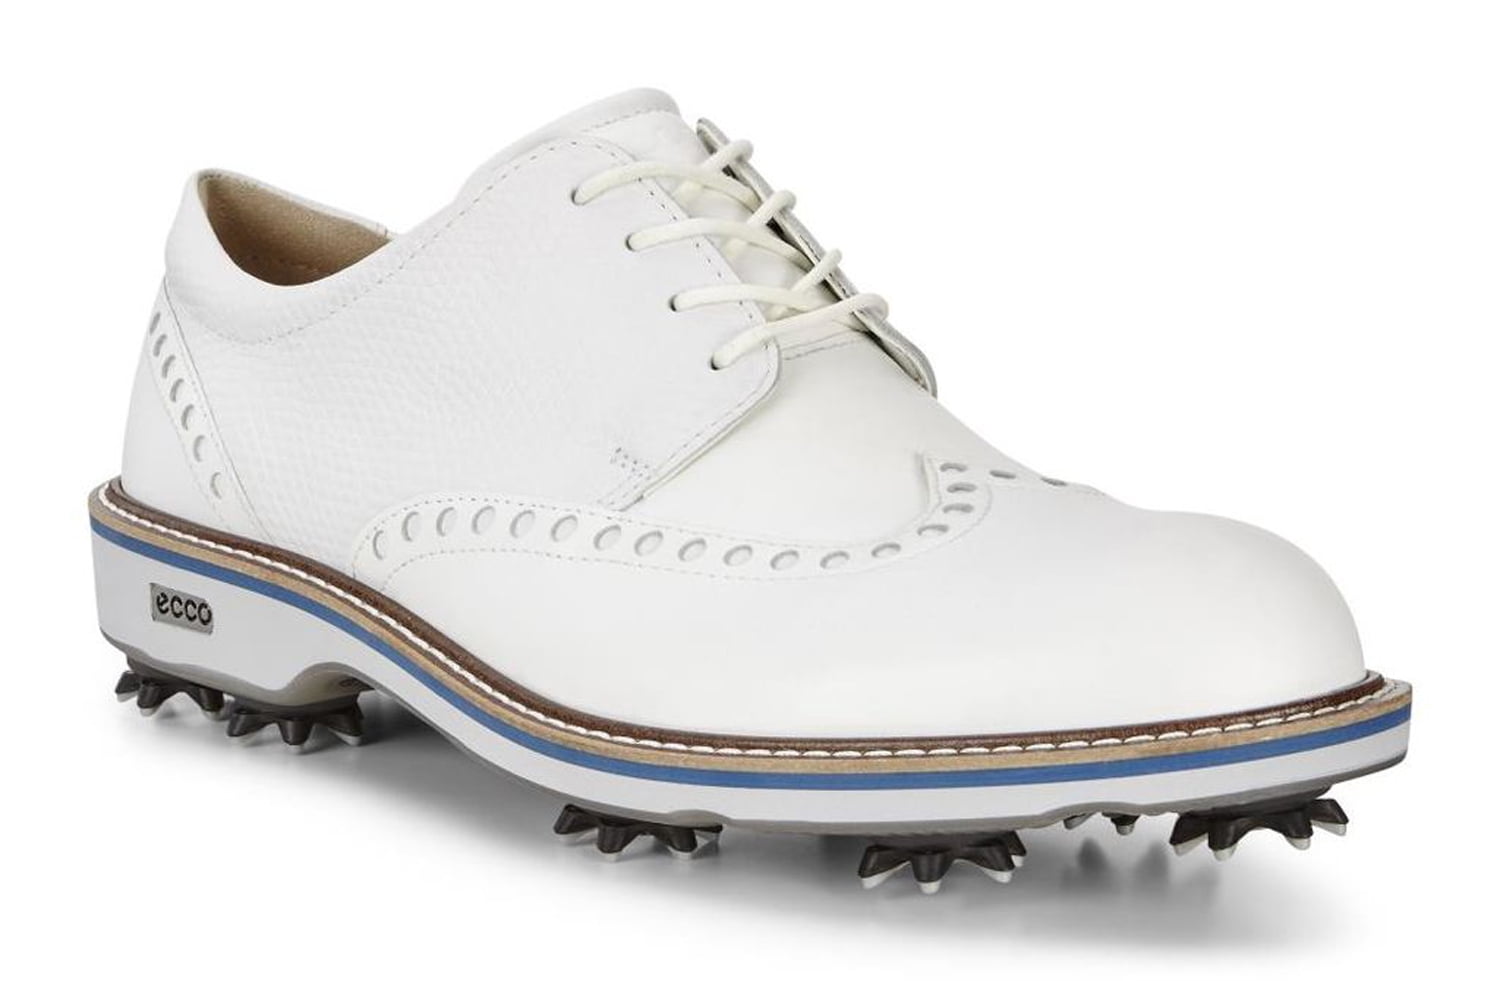 ecco golf shoes size 9